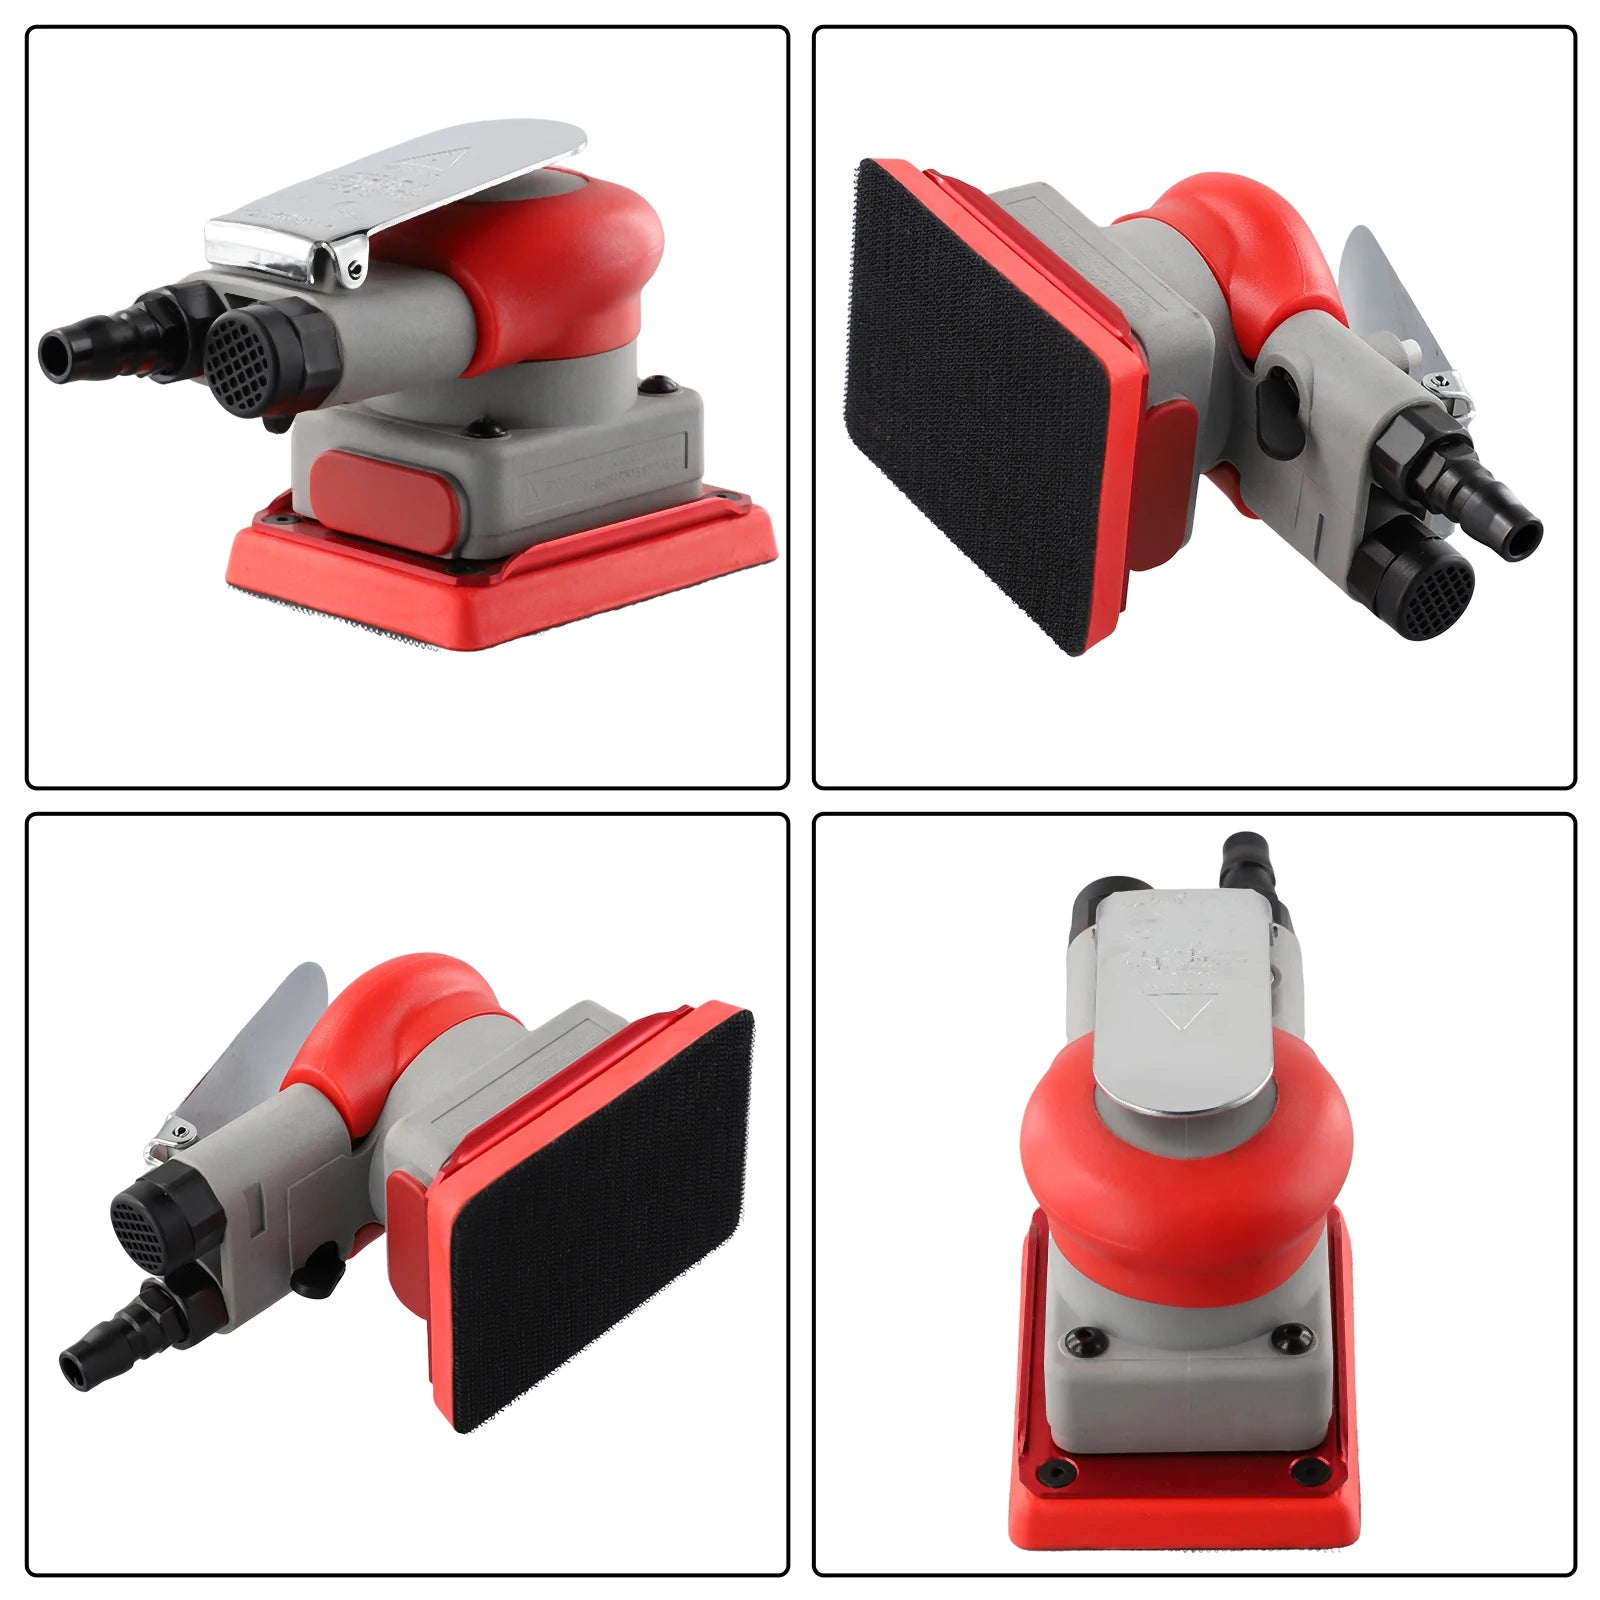 Polishing Tools Pneumatic Sander Metal Grinding Square Wood Grinding Woodworking Tools 1/4 Inch Air Inlet Joint